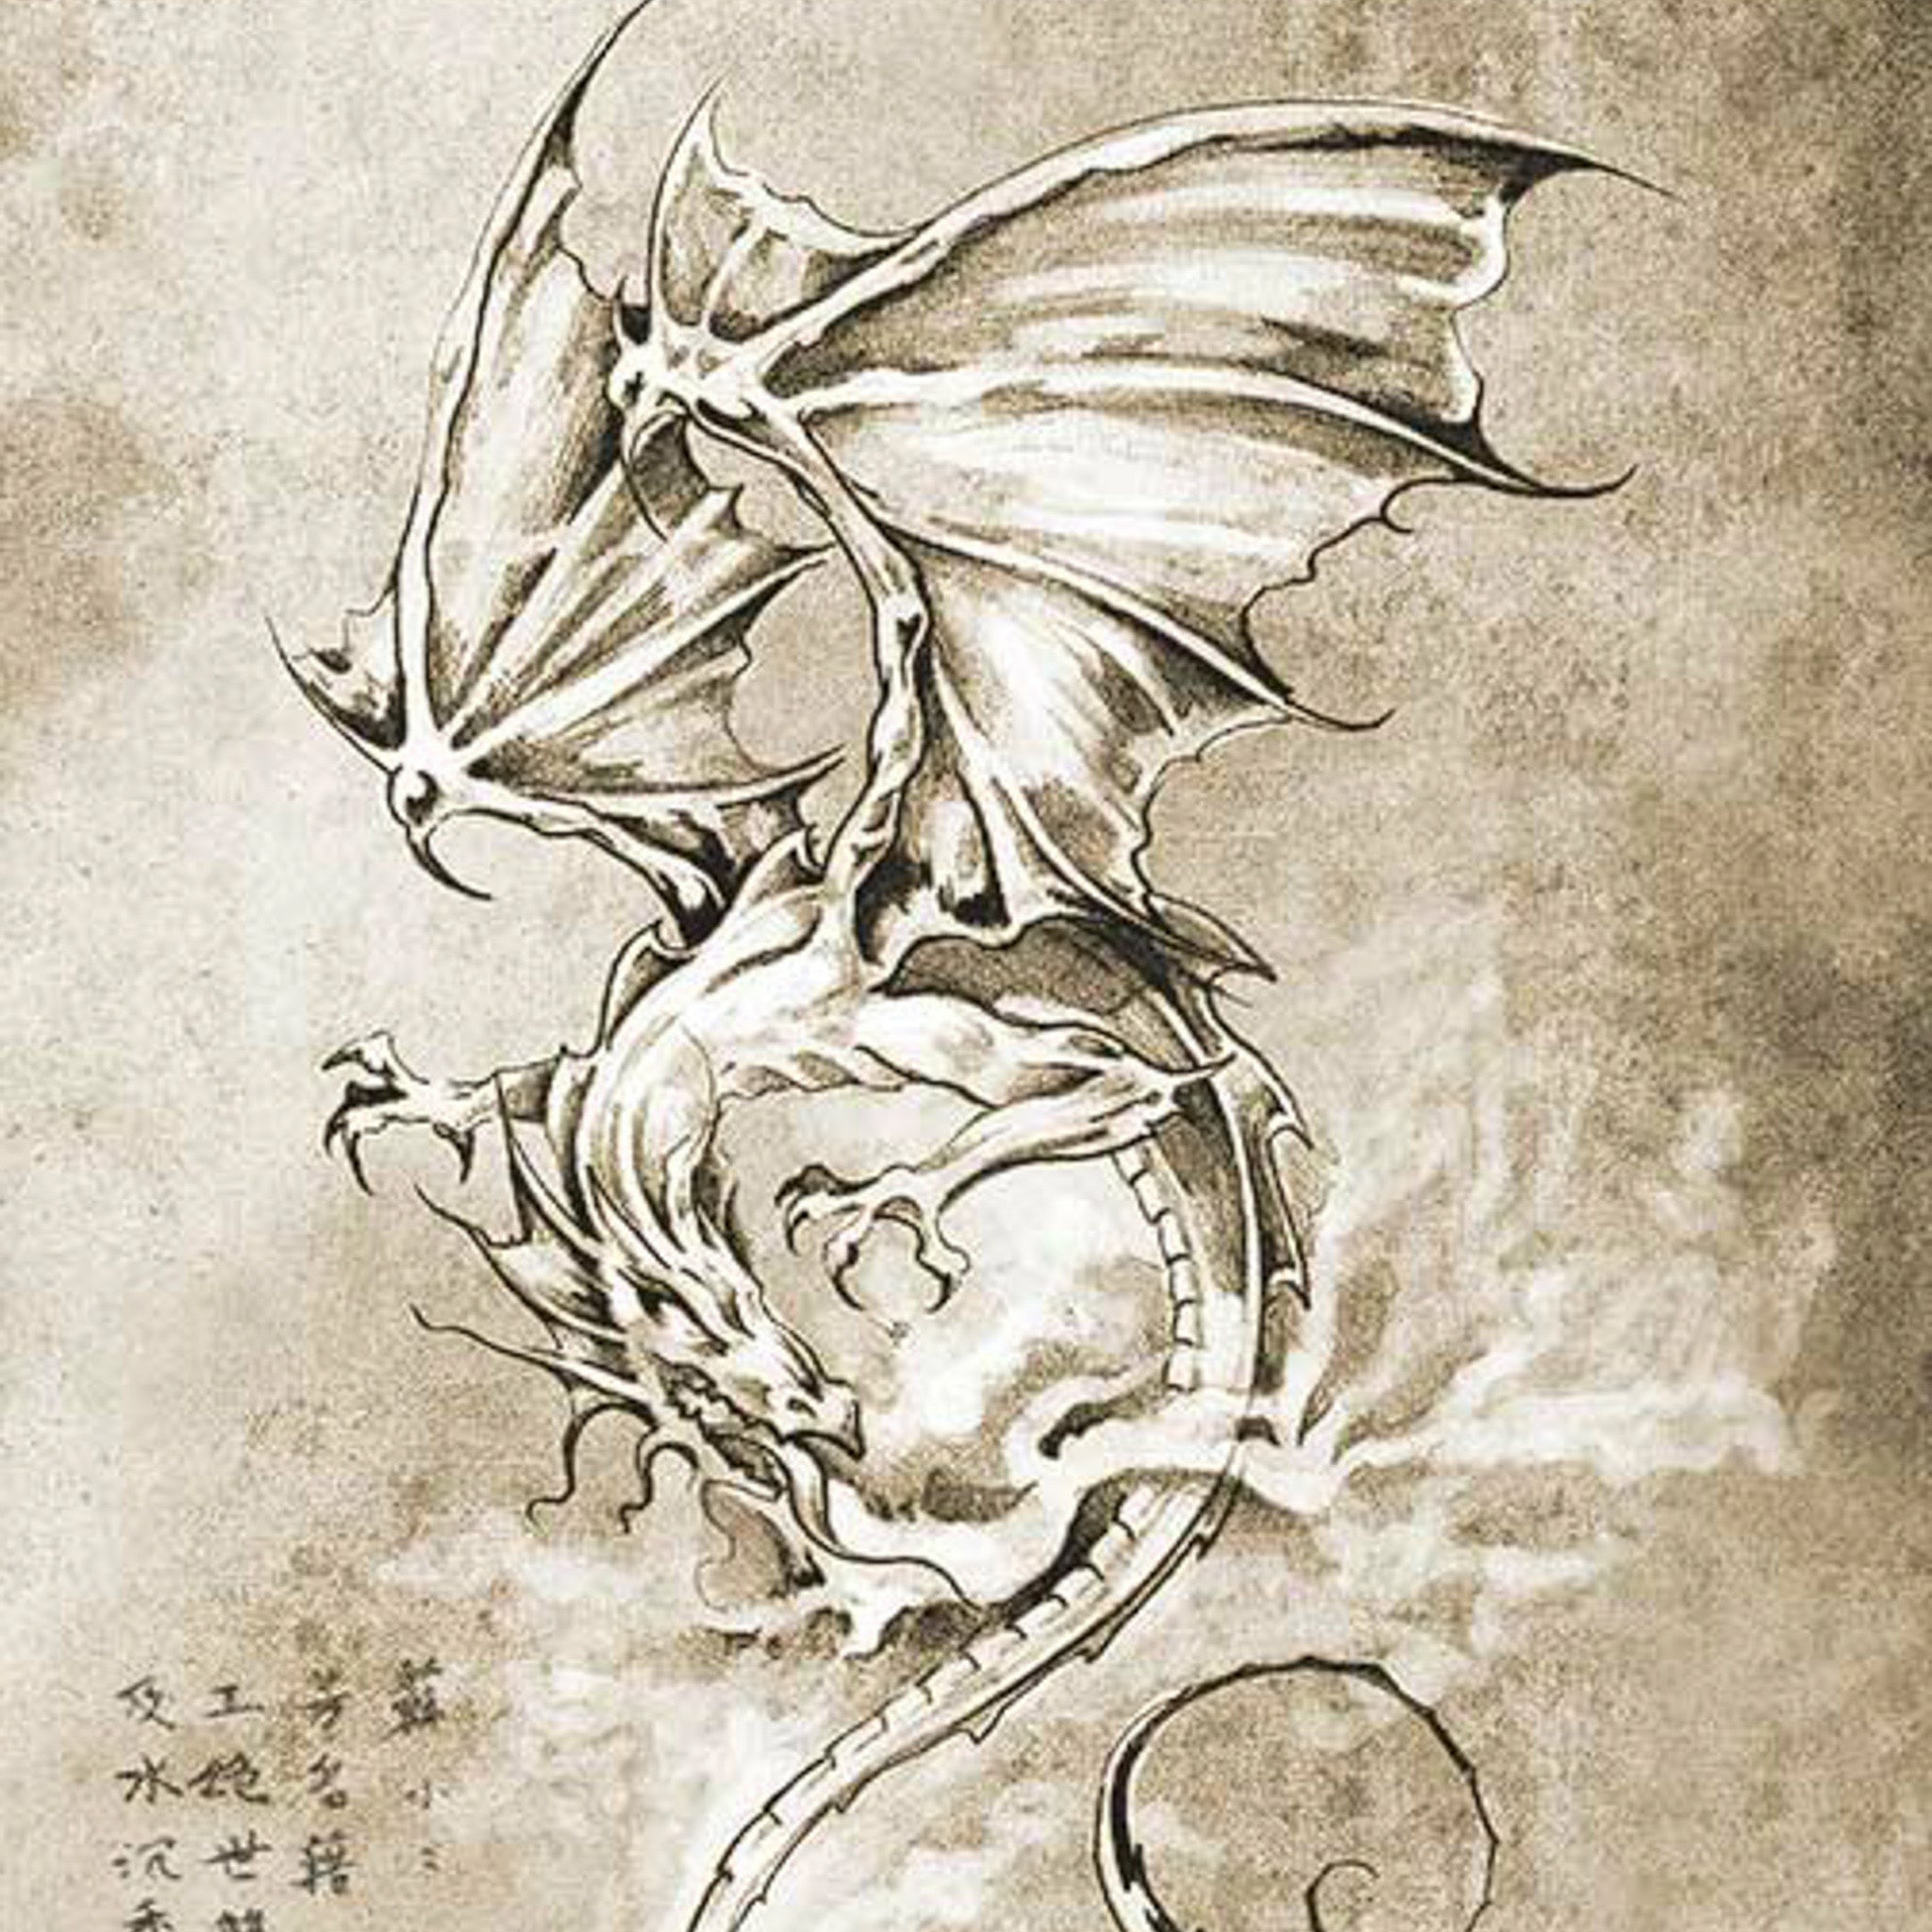 A2 rice paper design that features a drawing of a flying dragon on vintage parchment with Japanese writing at the bottom left corner.